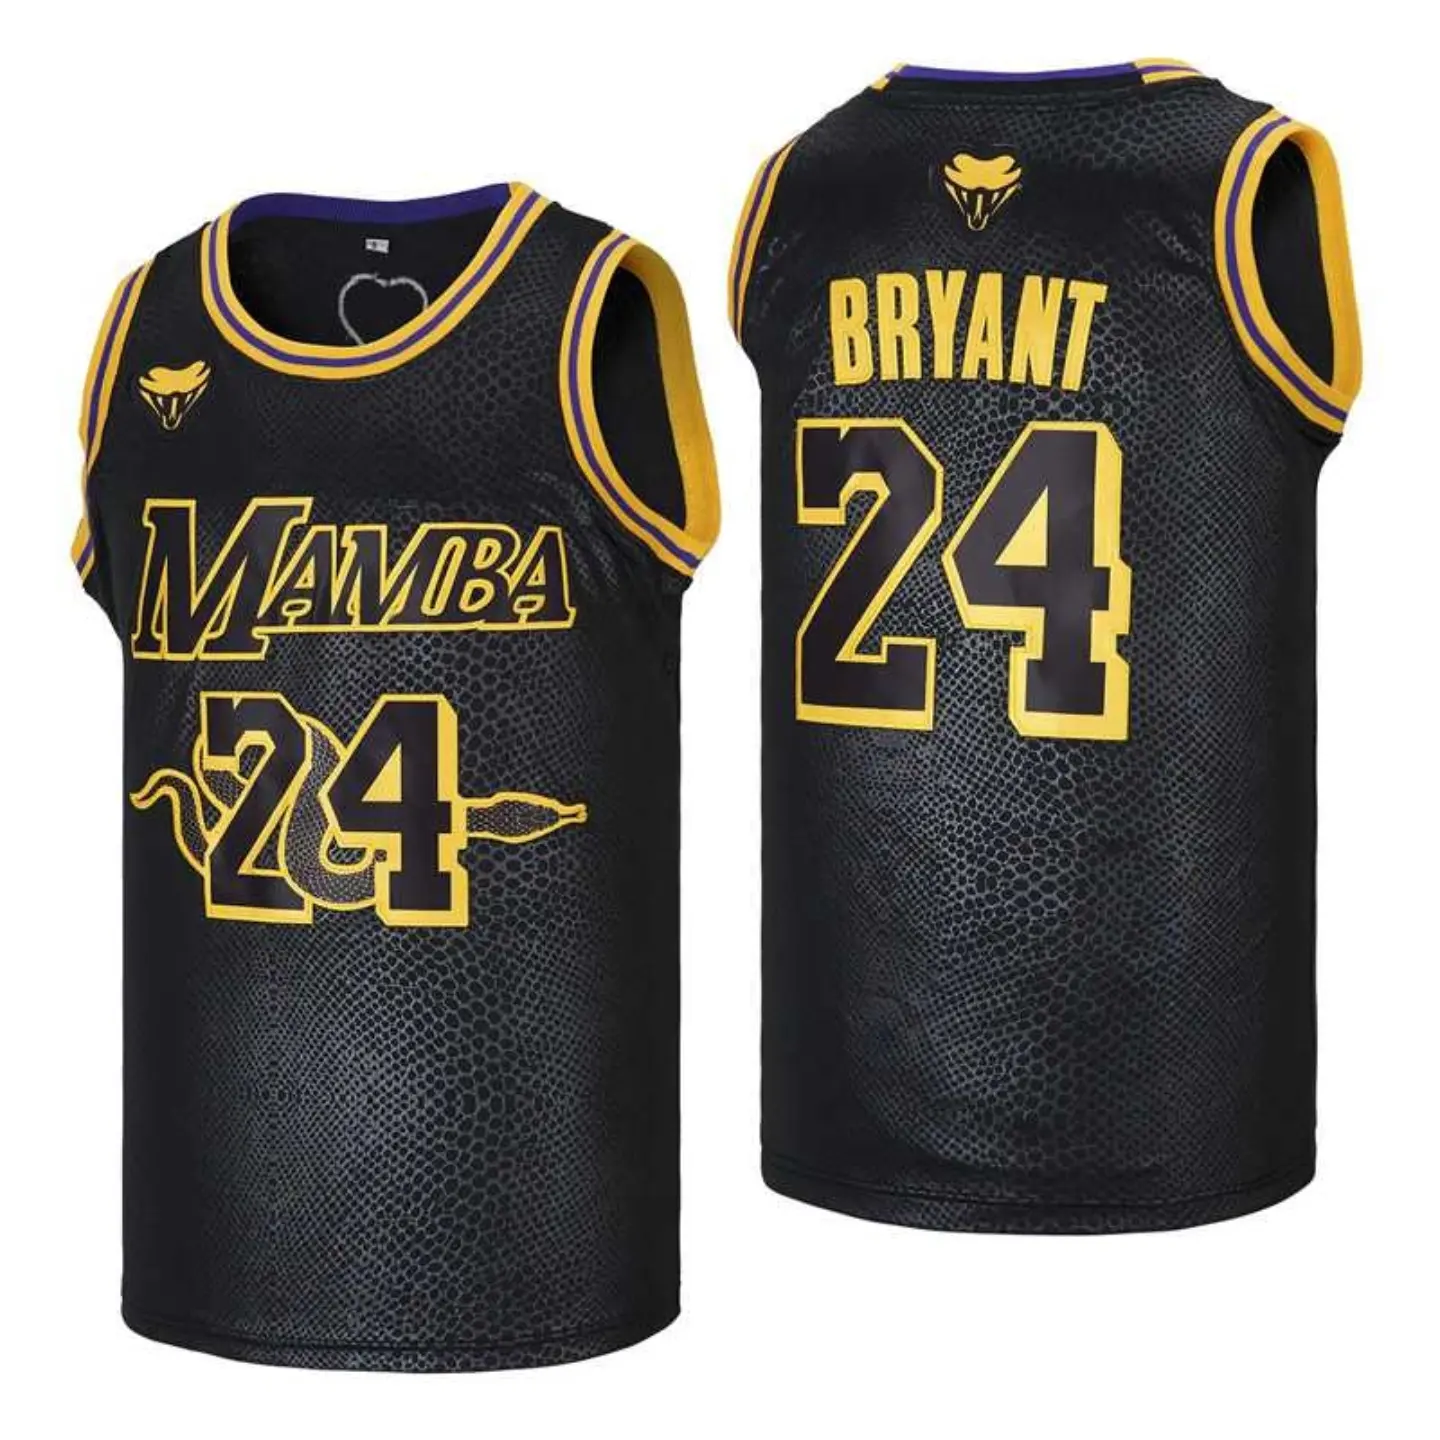 High Sewing Embroidery Quick Drying Breathable Basketball Men's Shirts Jerseys Tank Tops Mamba Bryant #24 Jersey Basketball Wear